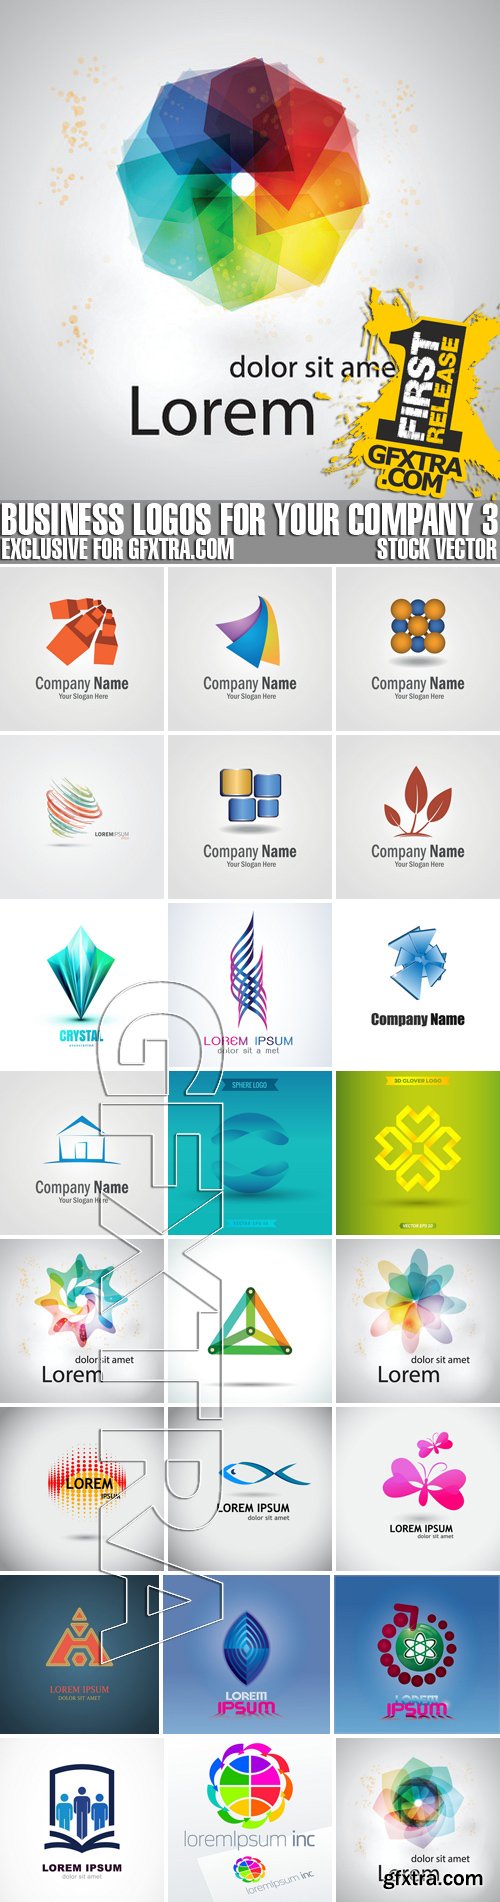 Stock Vectors - Business logos for your company 3, 50xEPS